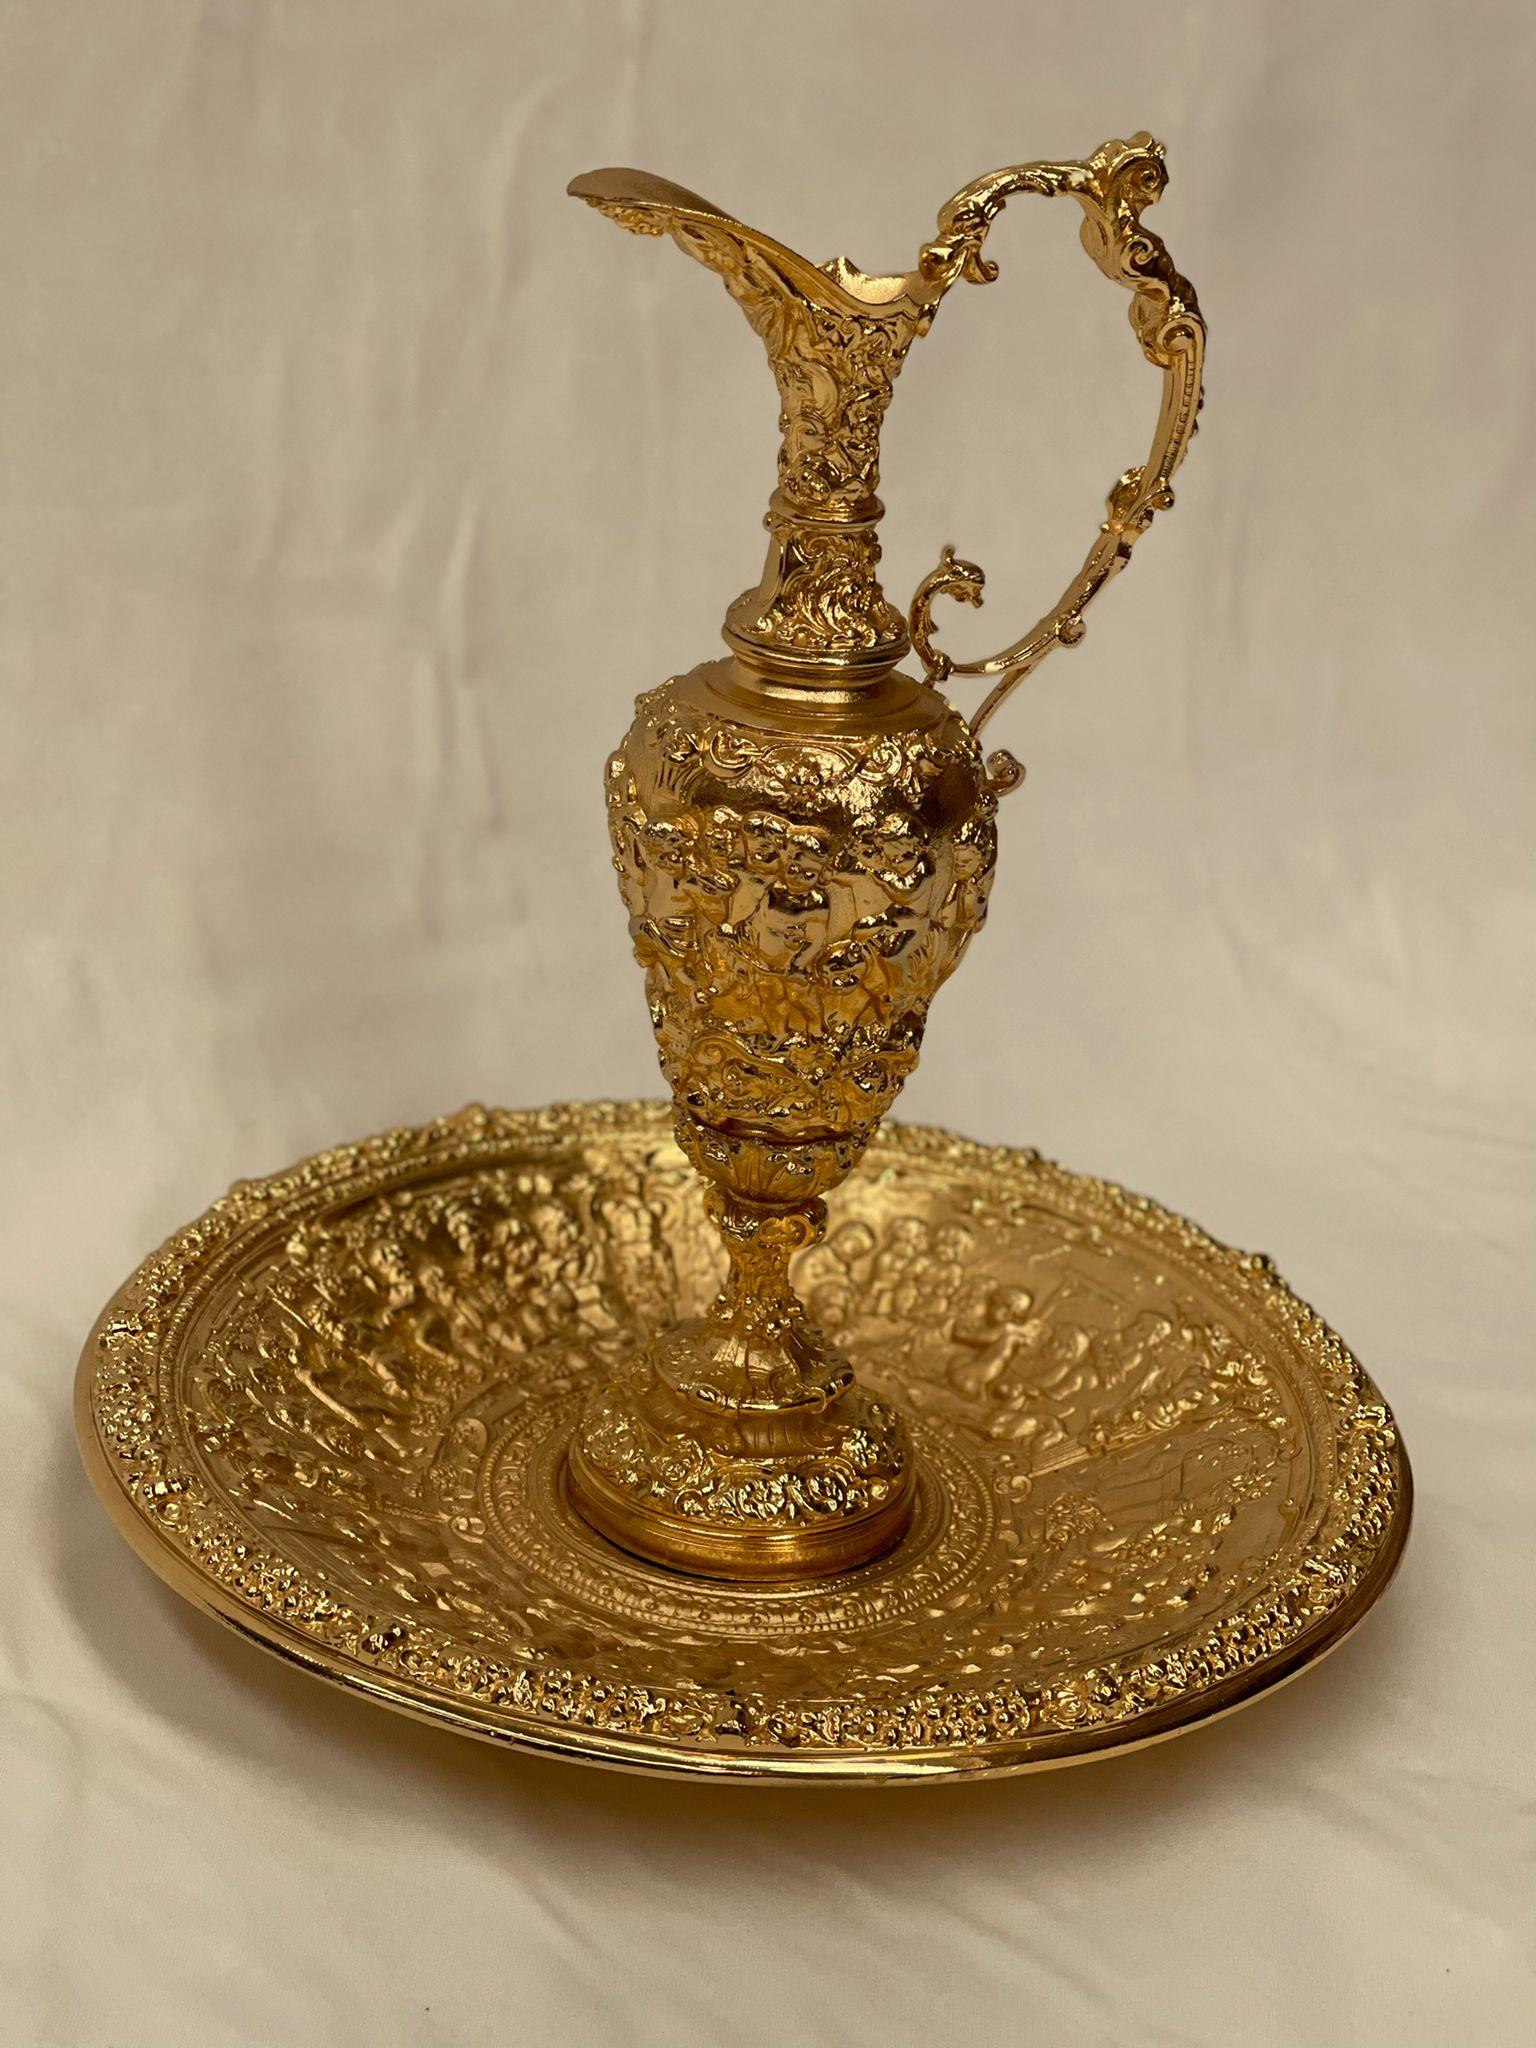 A unique piece created by bronze, ideal for giving a touch of class to your decor. Cup of bernini is a piace created suitably to who is seeking a iteam that meets elegance and hobby. It has been made manually which takes hours of labor and smartest